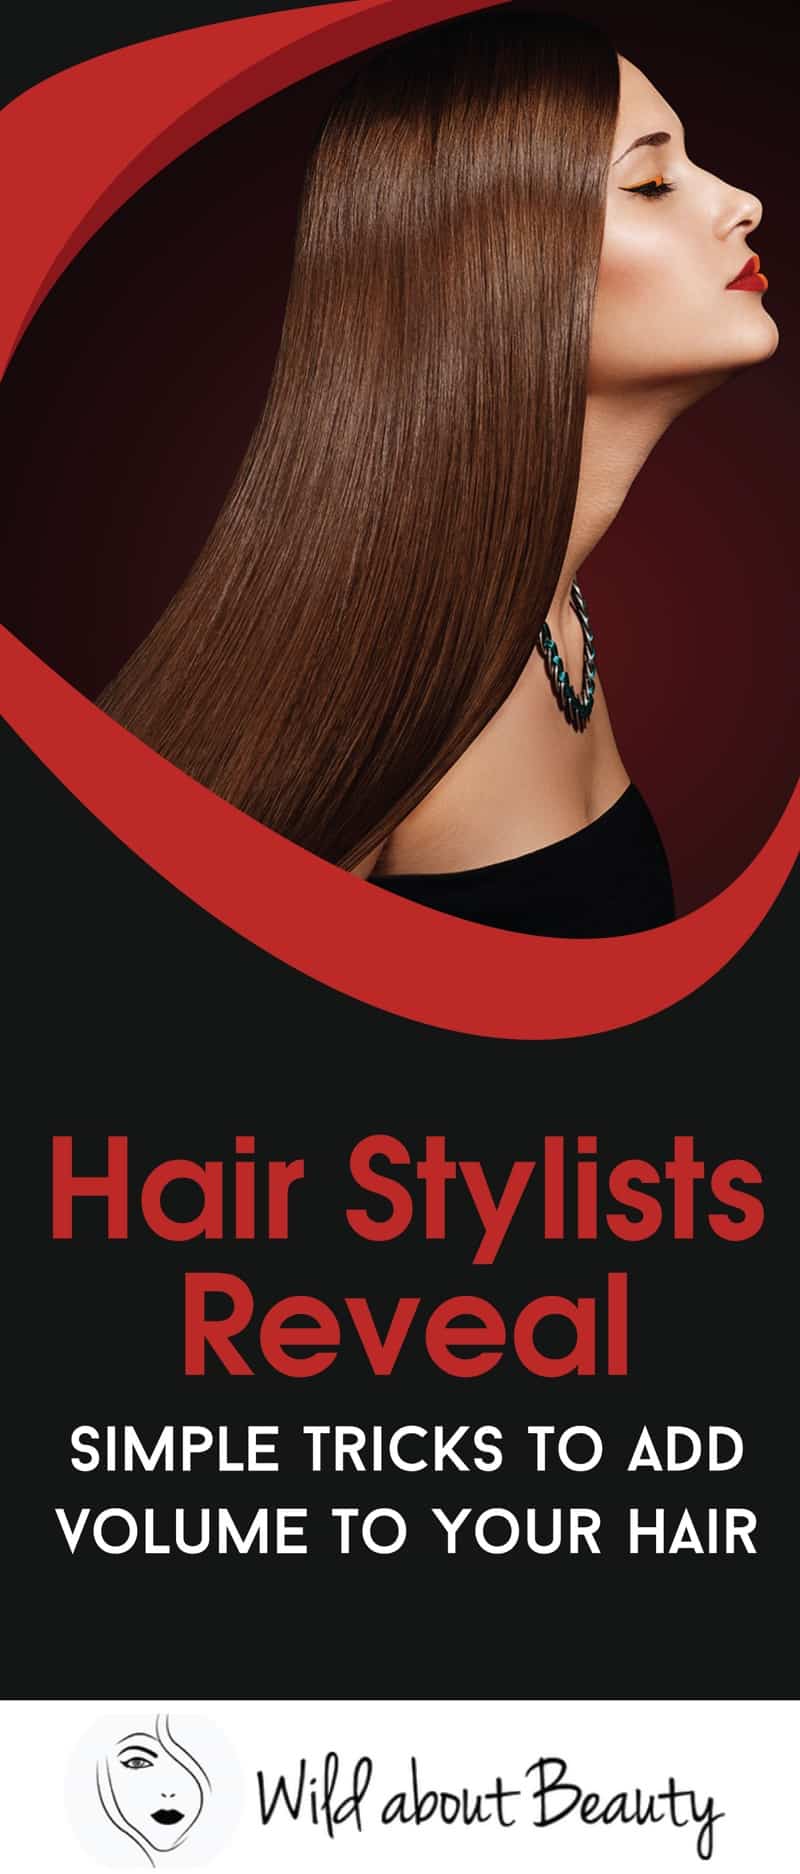 Hair-Stylists-Reveal